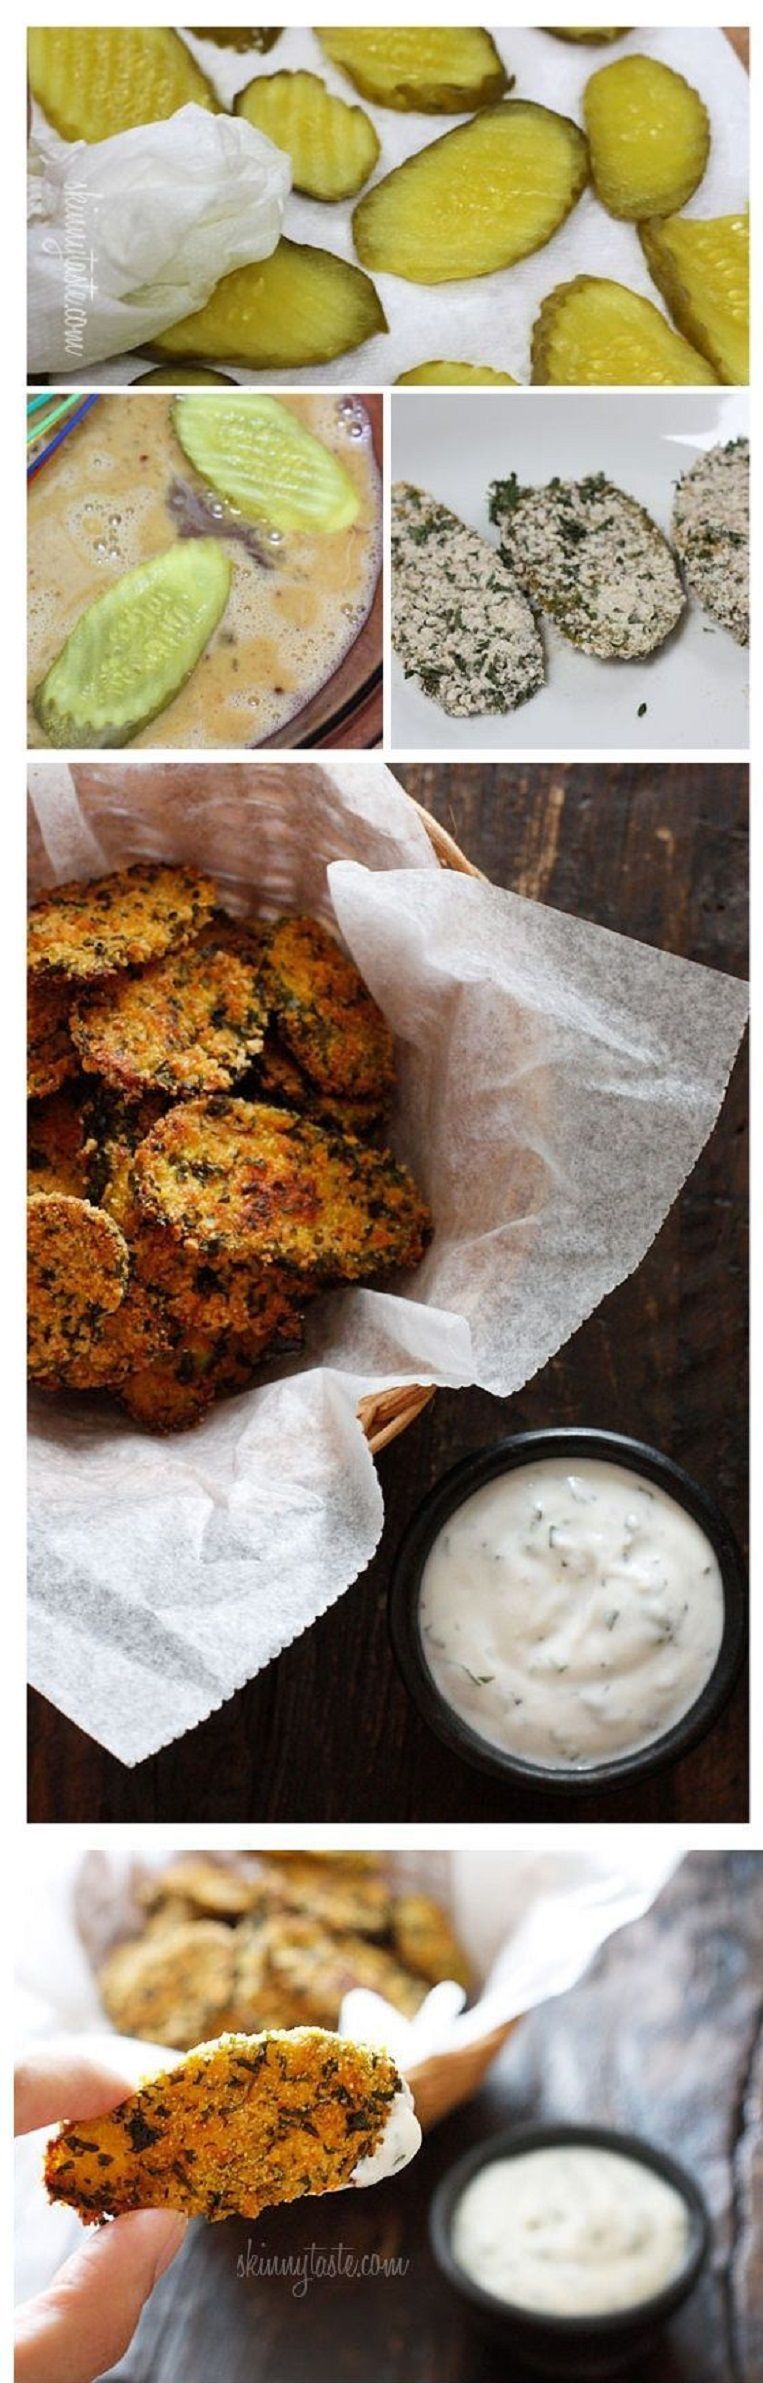 Oven “Fried” Pickles with Skinny Herb Buttermilk Ranch Dip – 14 Clean Eating Snacks | GleamItUp